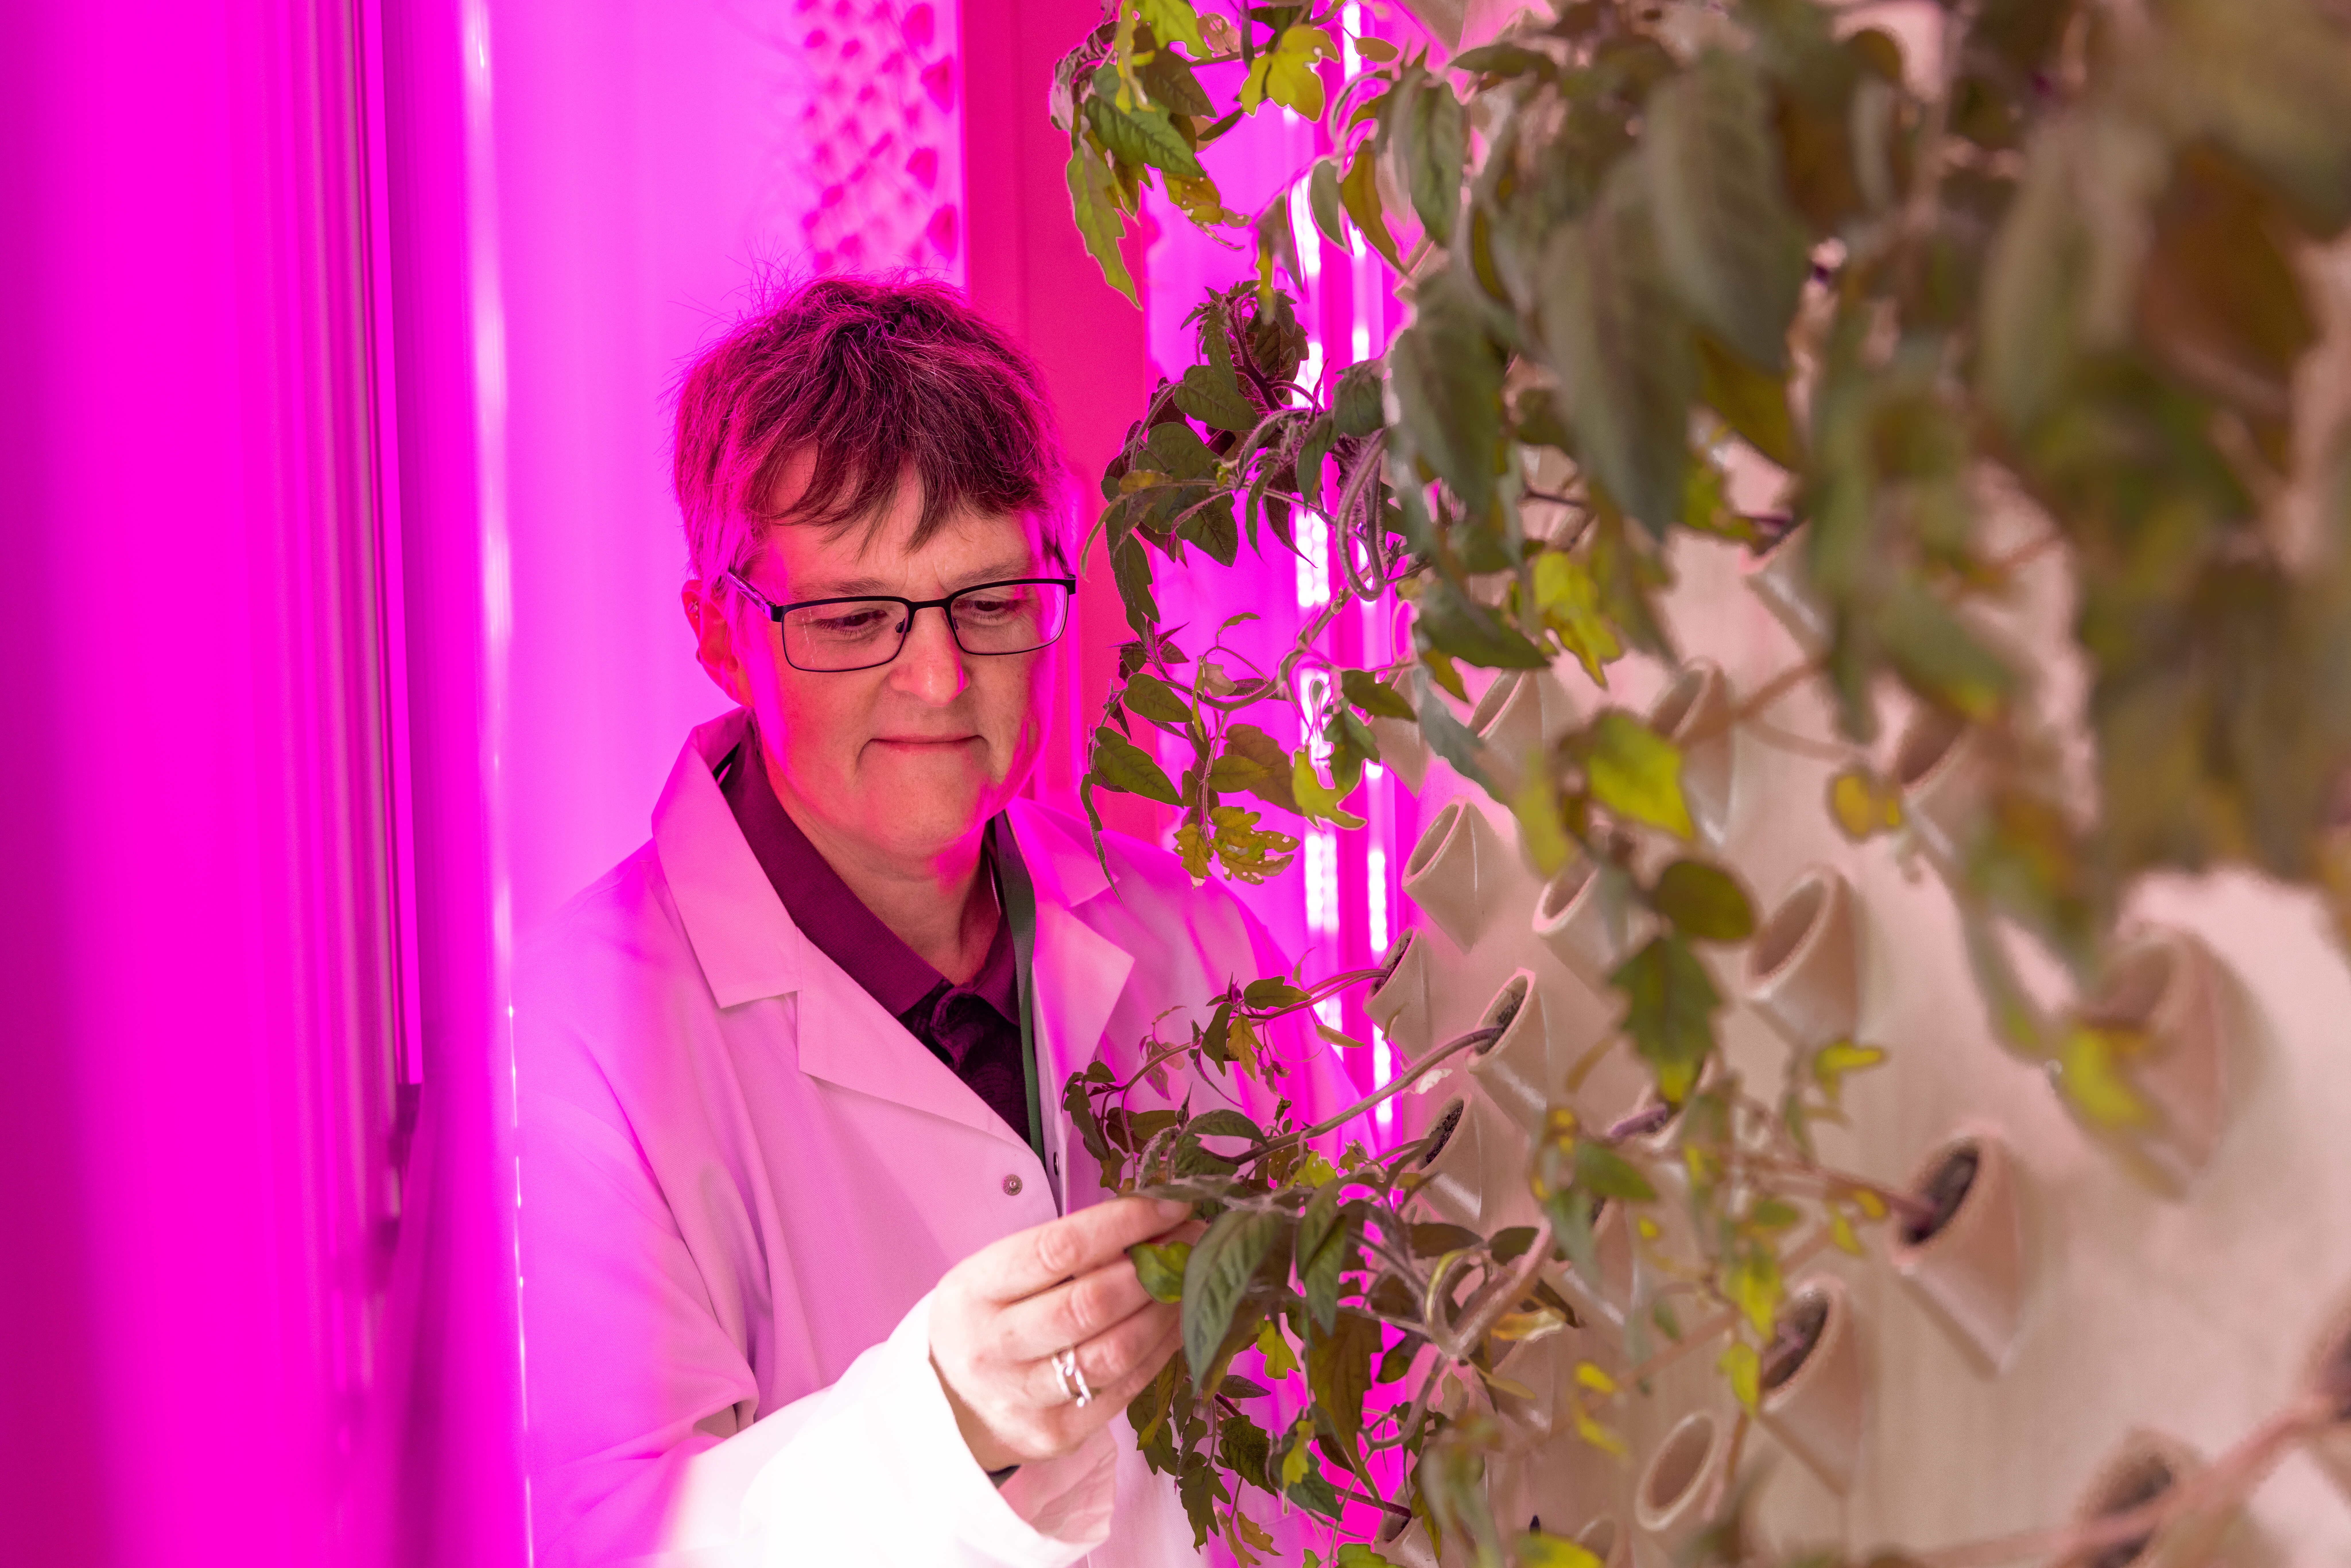 Professor Tracy Lawson examines the plants being grown in the vertical farm at Essex University's new plant lab. (Essex University/ PA)